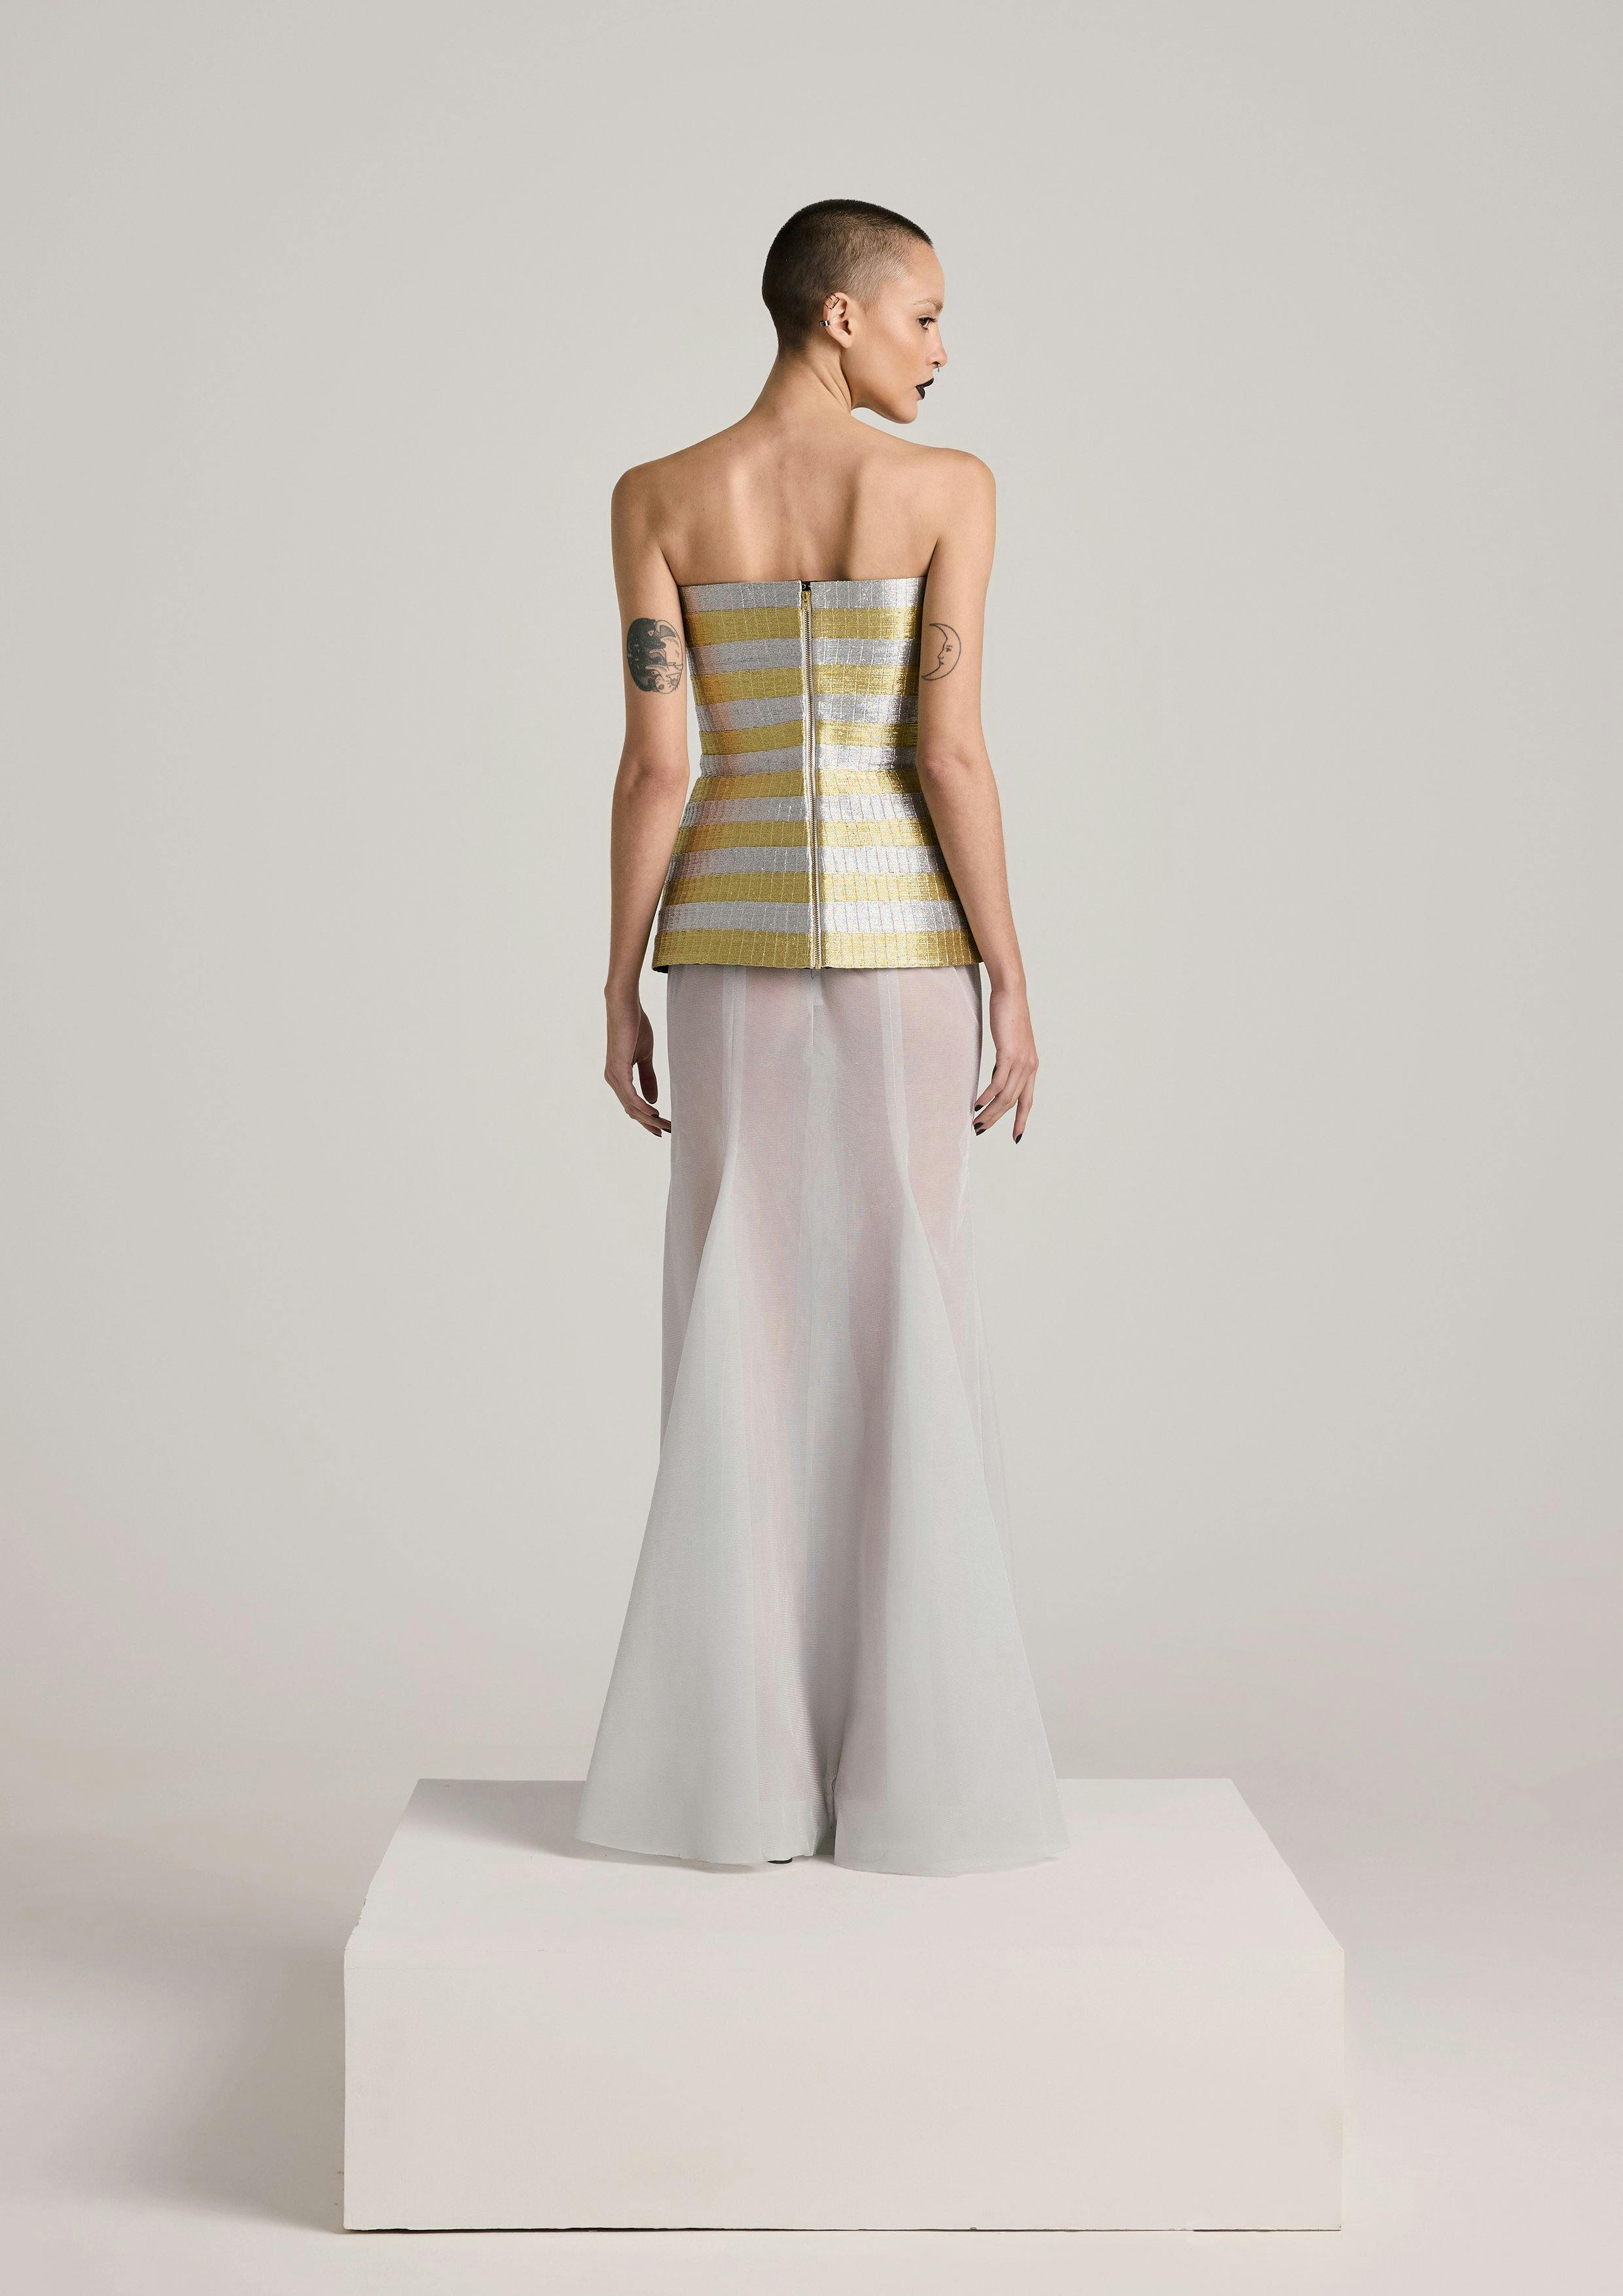 Thumbnail preview #1 for The Zari Striped Sculpted Bustier & Ice Sheer Metallic Skirt